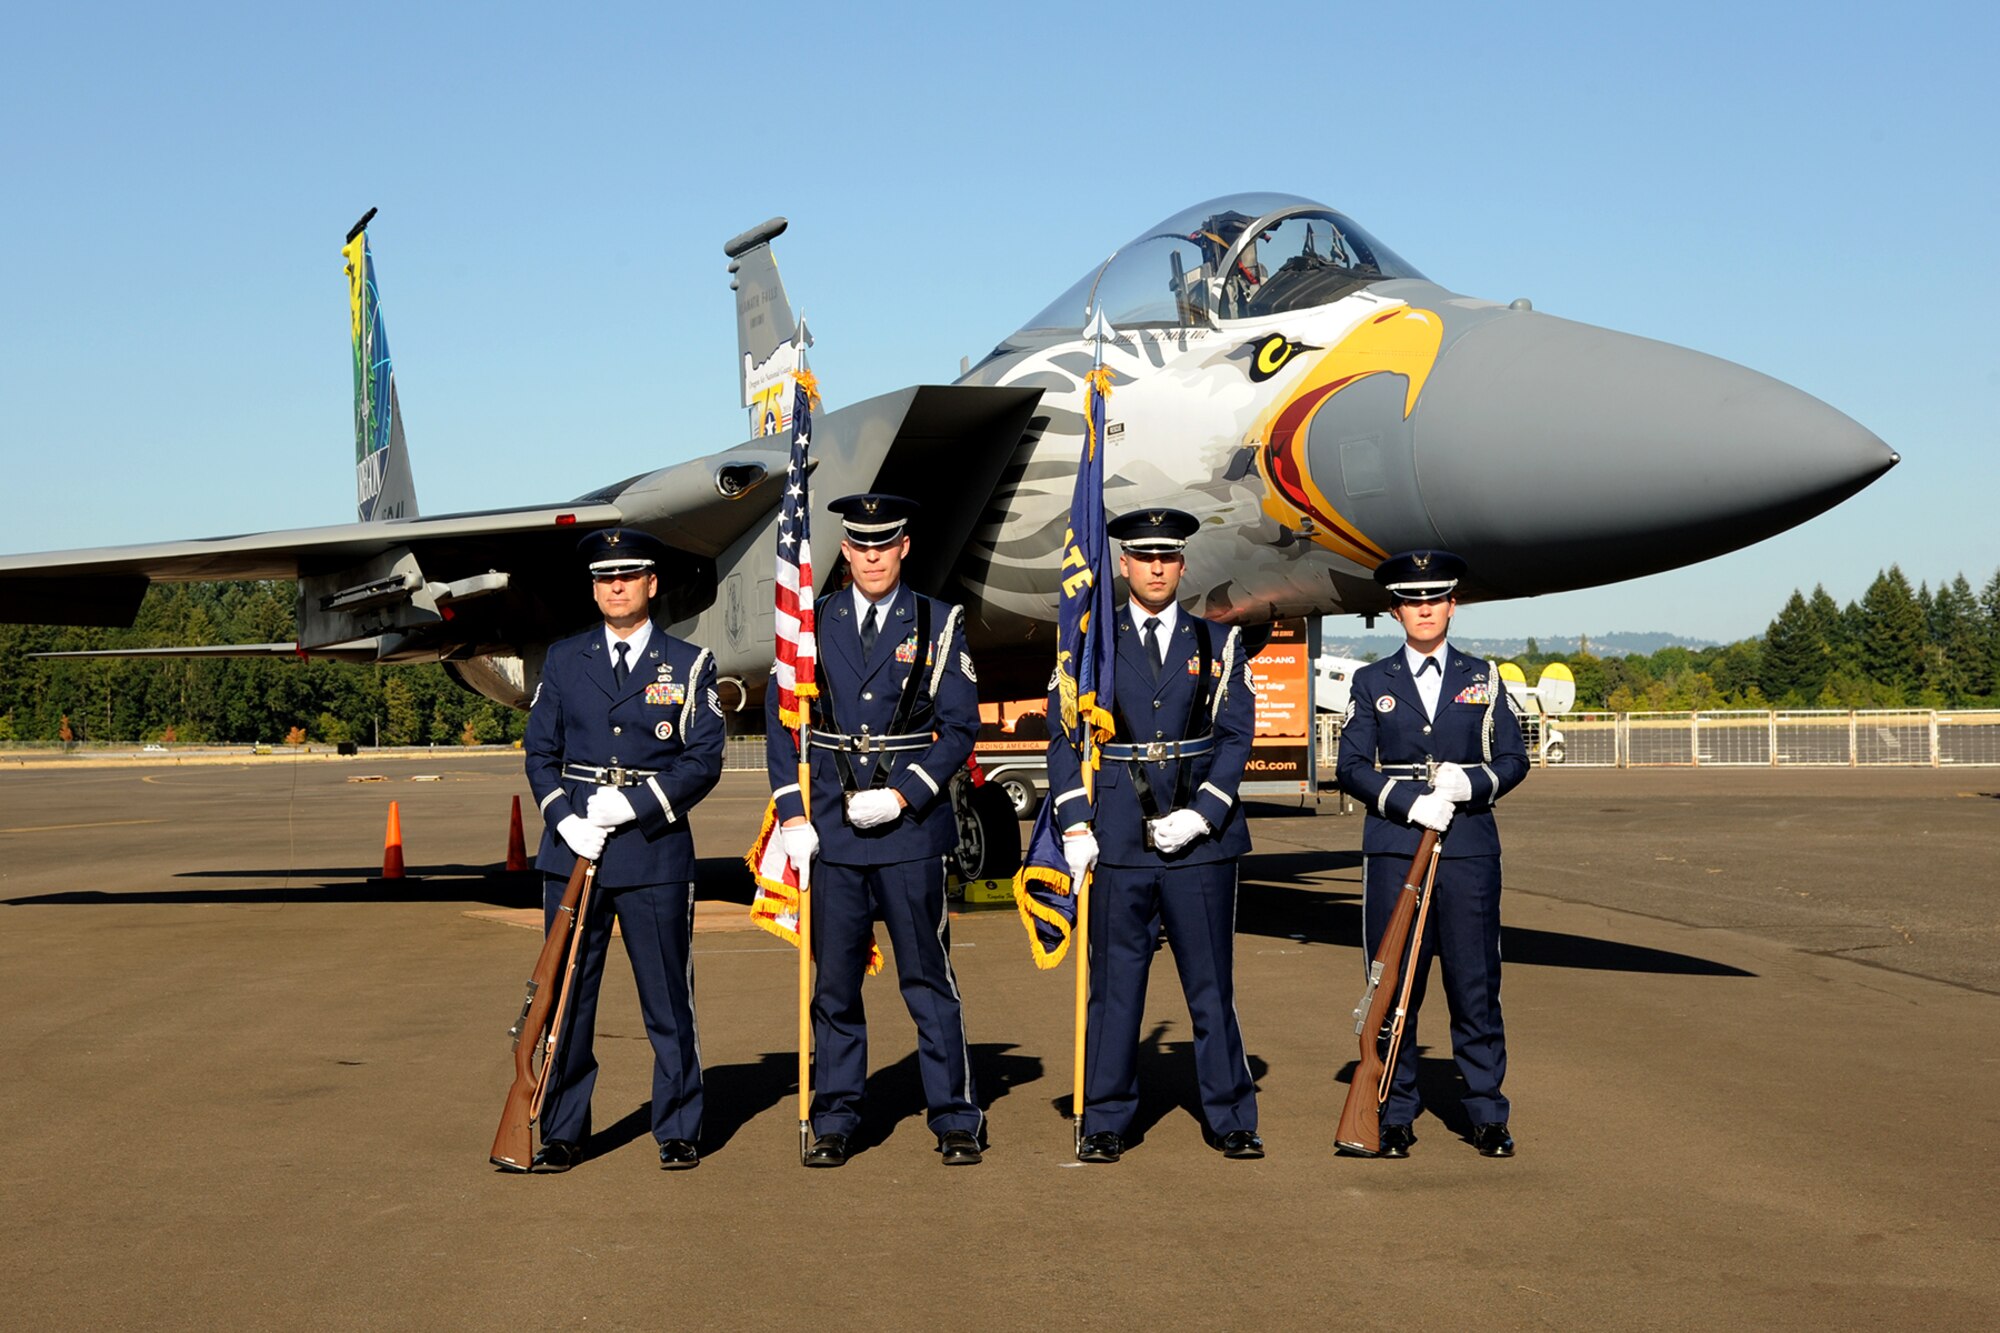 Members of the 142nd Fighter Wing Base Honor Guard team pose for a photograph with an Oregon Air National Guard F-15 Eagle assigned to the 173rd Fighter Wing at the Hillsboro International Airport, Ore., as part of the Oregon International Air Show, Aug. 6, 2016. The ‘Screaming Eagle’ paint designed is in recognition of the 75th Anniversary of the Oregon Air National Guard. (U.S. Air National Guard photo by Master Sgt. Shelly Davison, 142nd Fighter Wing Public Affairs/Released).